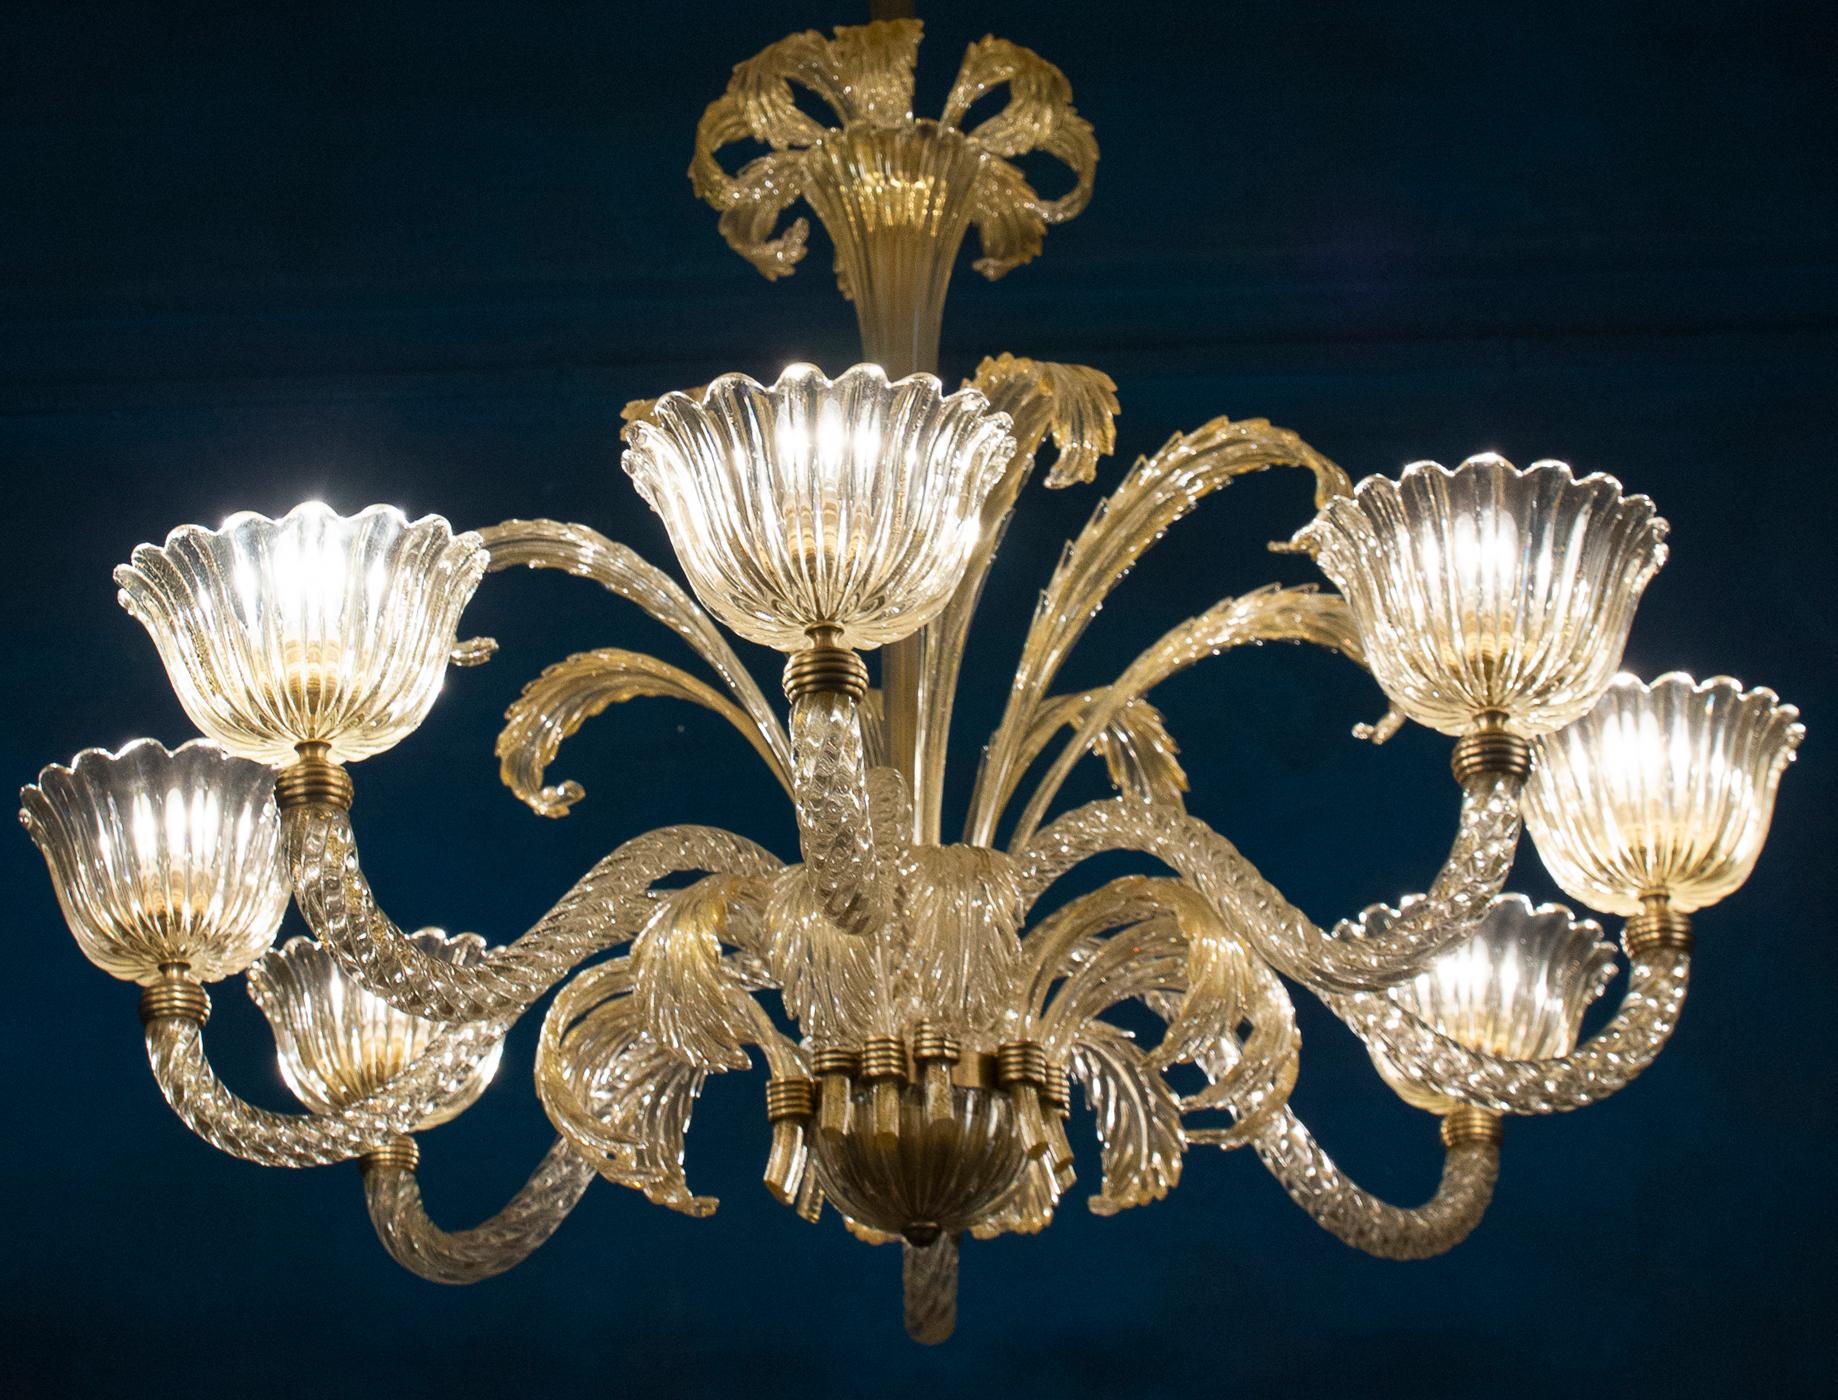 Italian Magnificent Art Deco Mounted Murano Glass Chandelier by Ercole Barovier, 1940 For Sale